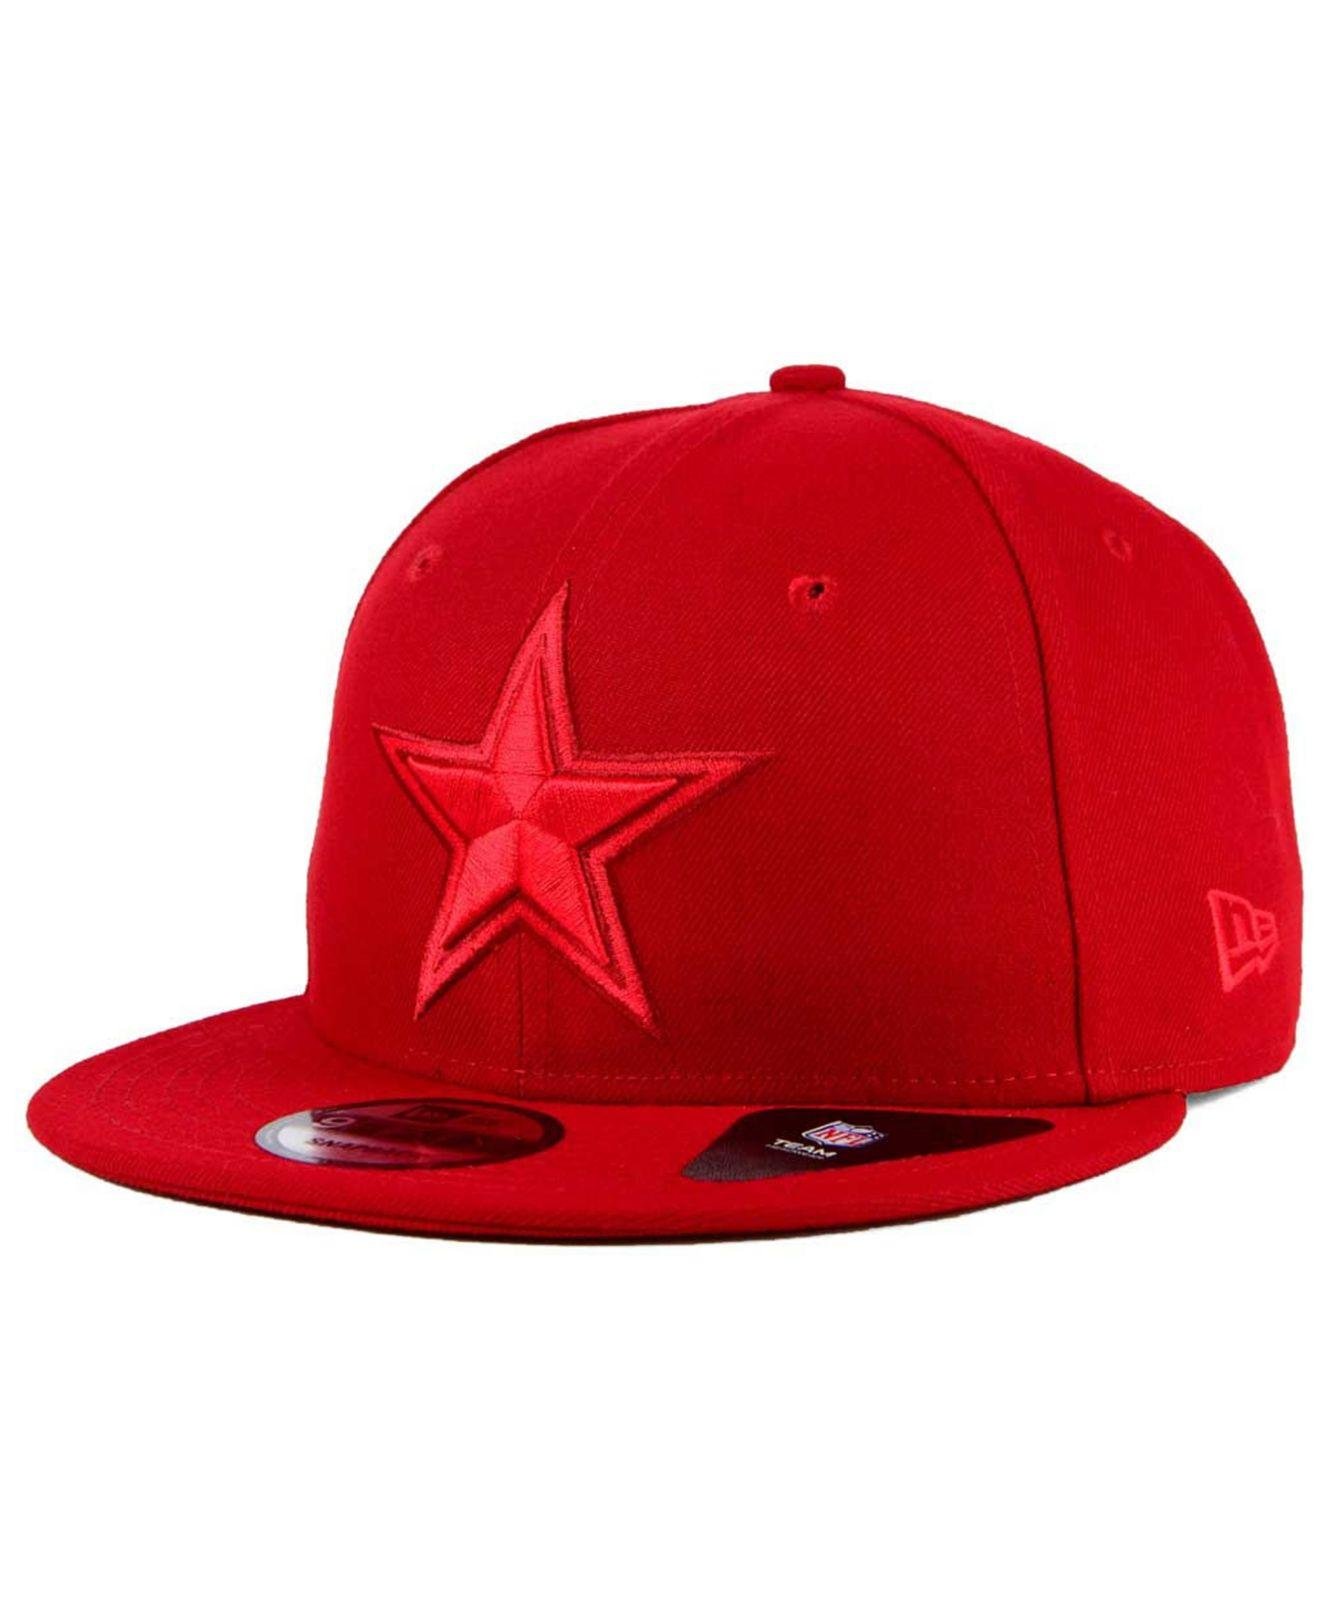 red white and blue dallas cowboys hat